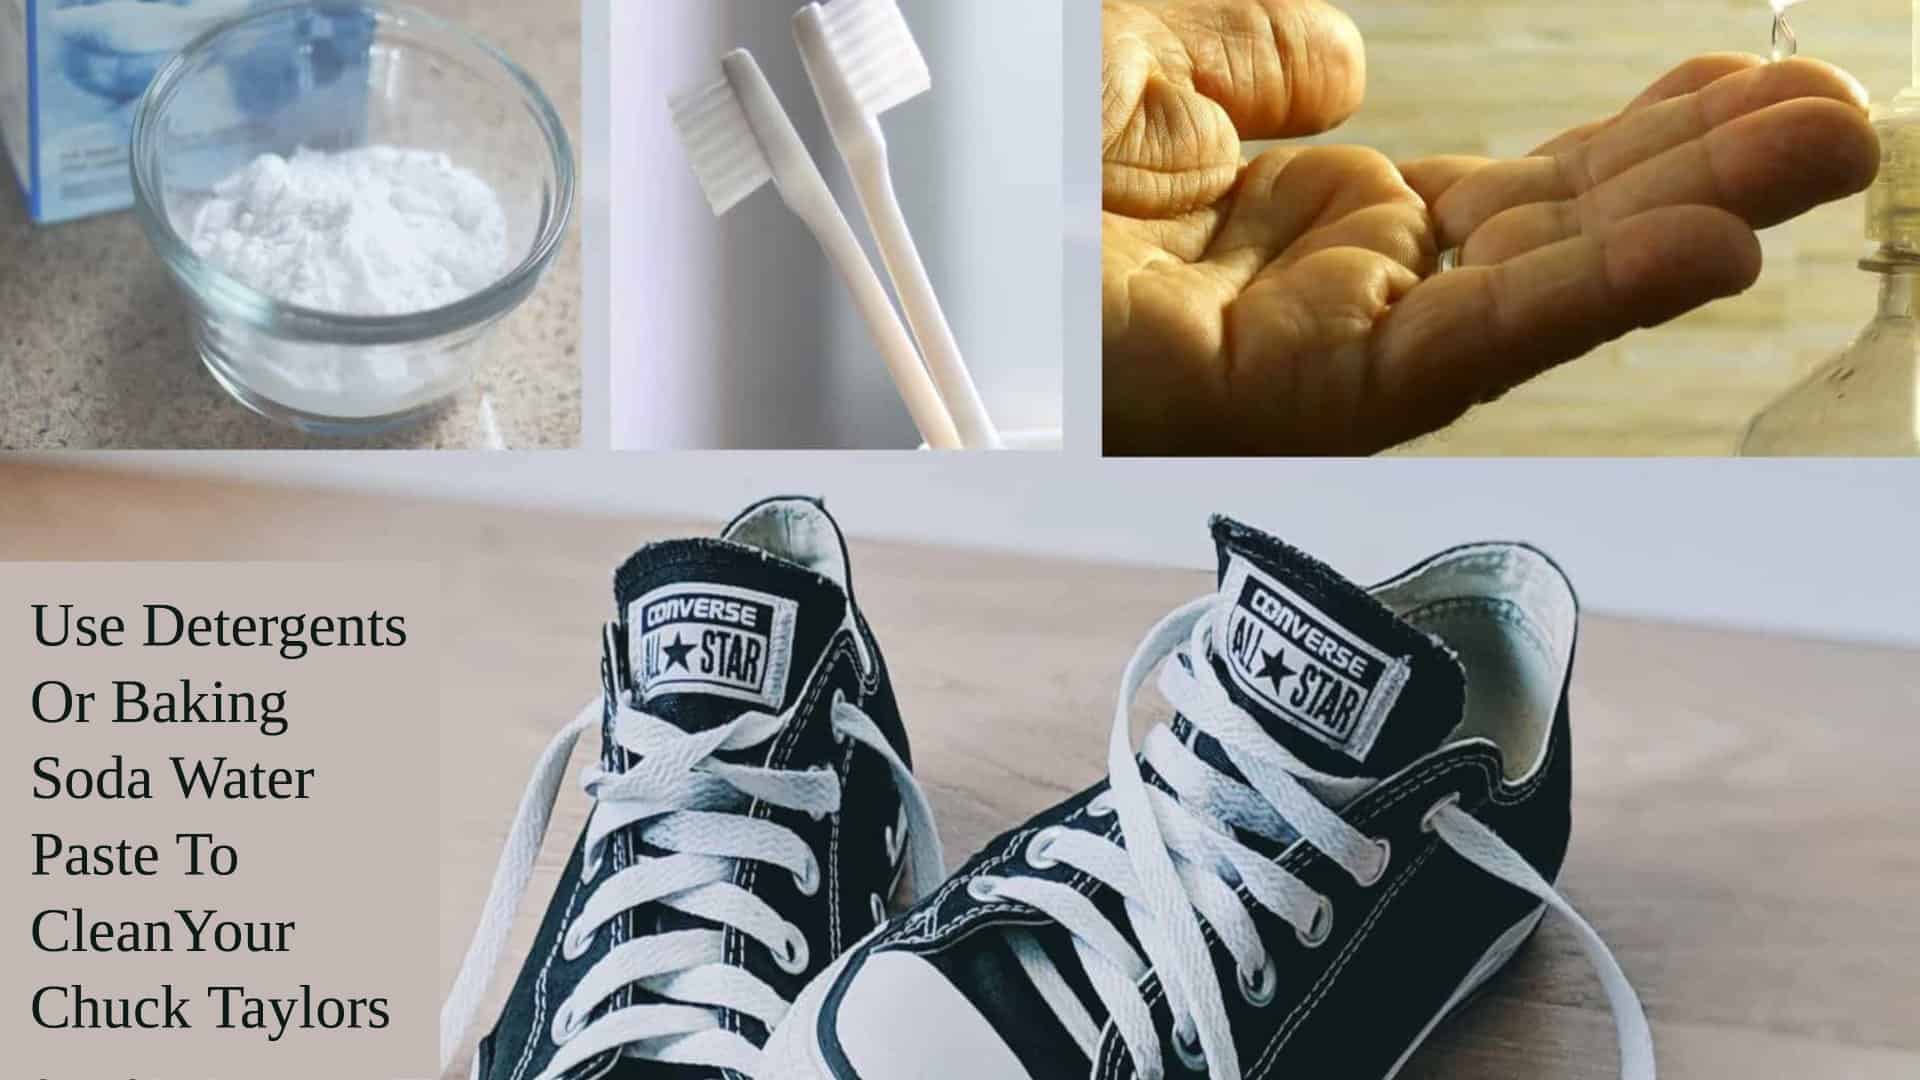 Use-Detergents-Or-Baking-Soda-Water-Paste-To-Clean-Your-Chuck-Taylors